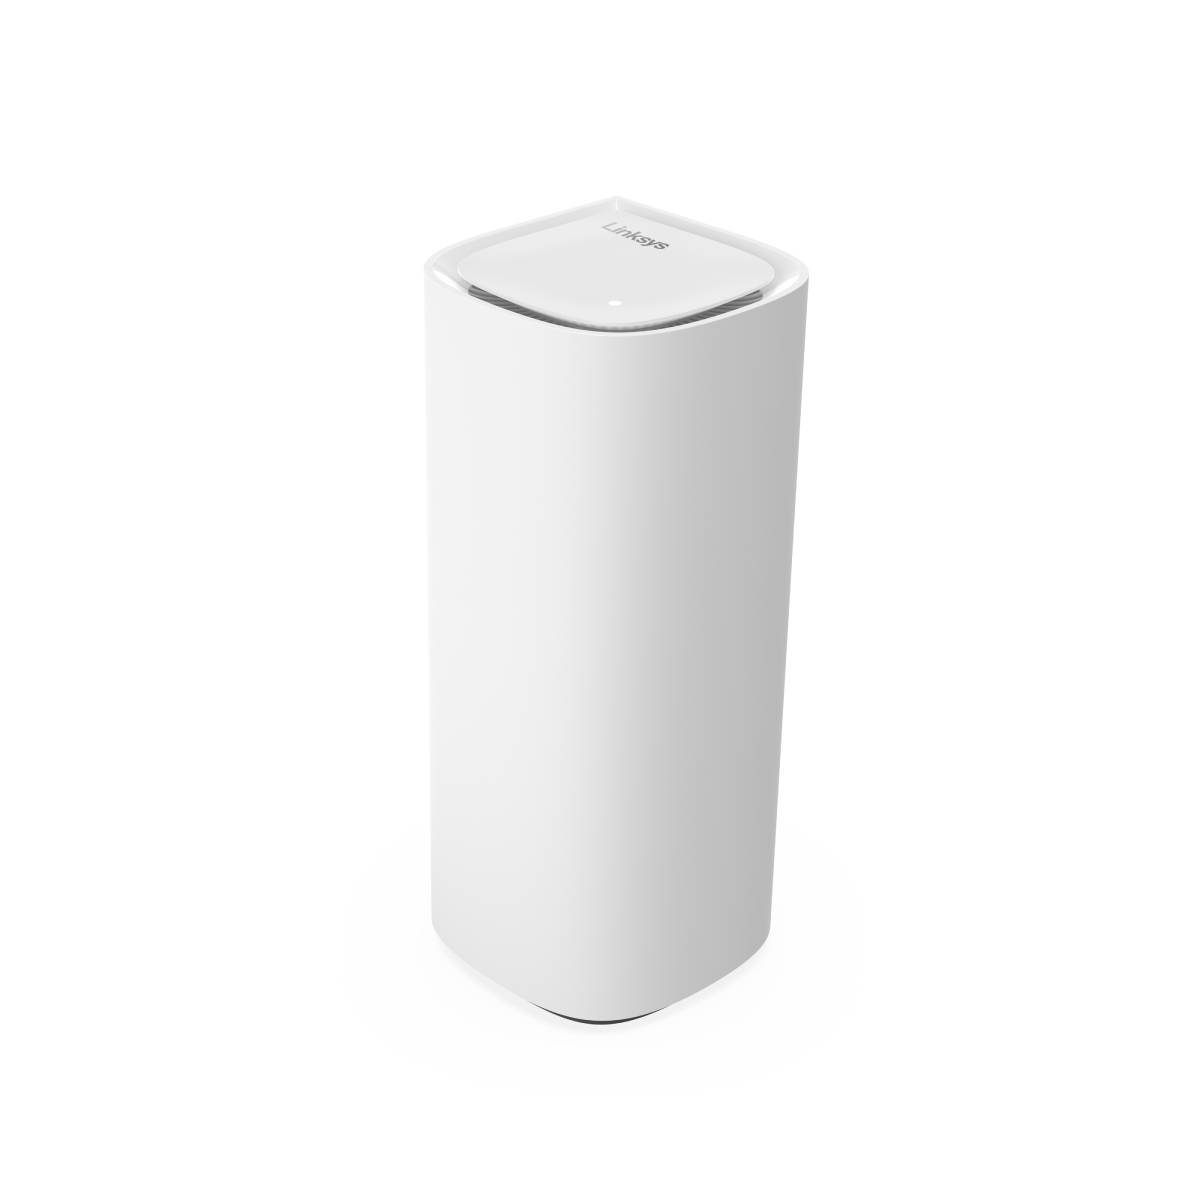 Linksys Velop Pro 7 Tri-Band BE11000 Cognitive Mesh WiFi 7 Router (MBE7001) (1-Pack), , large image number 0